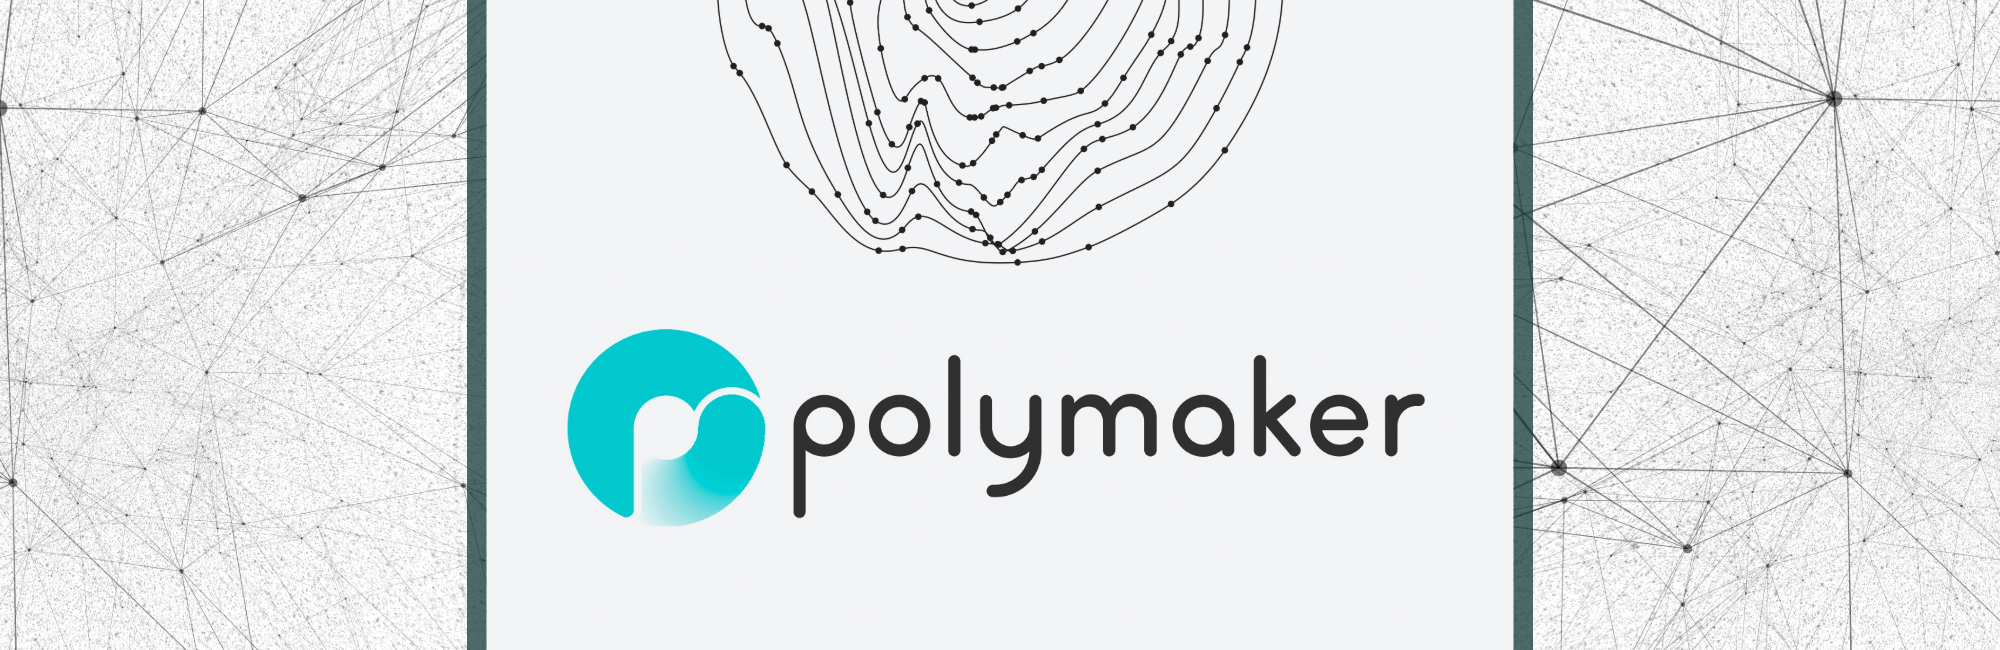 PolyMaker Specialty